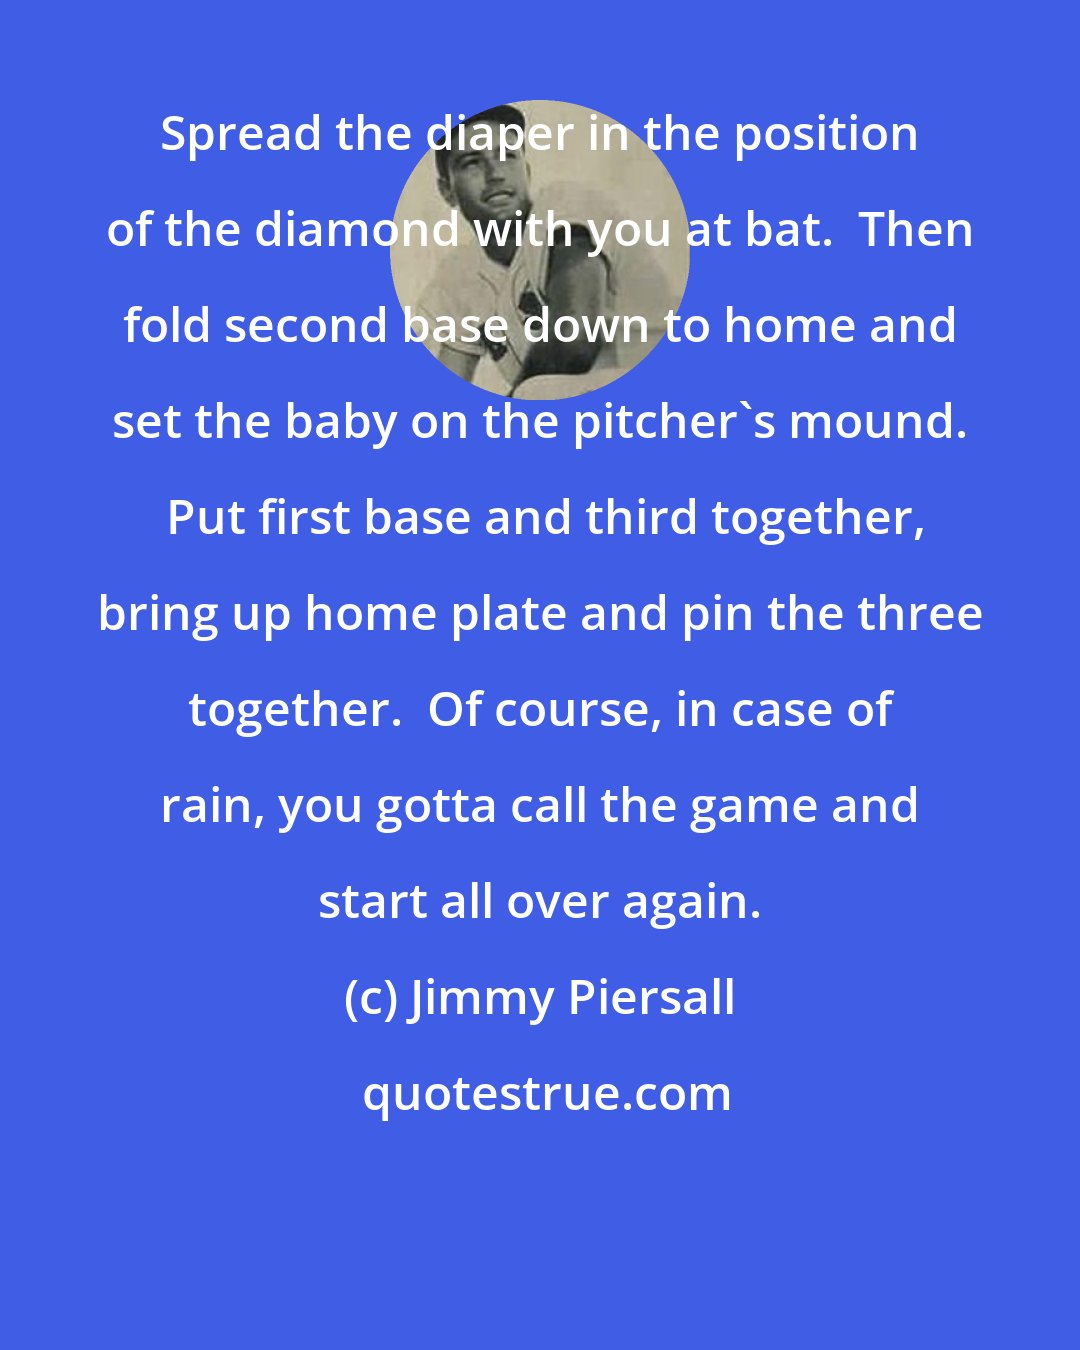 Jimmy Piersall: Spread the diaper in the position of the diamond with you at bat.  Then fold second base down to home and set the baby on the pitcher's mound.  Put first base and third together, bring up home plate and pin the three together.  Of course, in case of rain, you gotta call the game and start all over again.